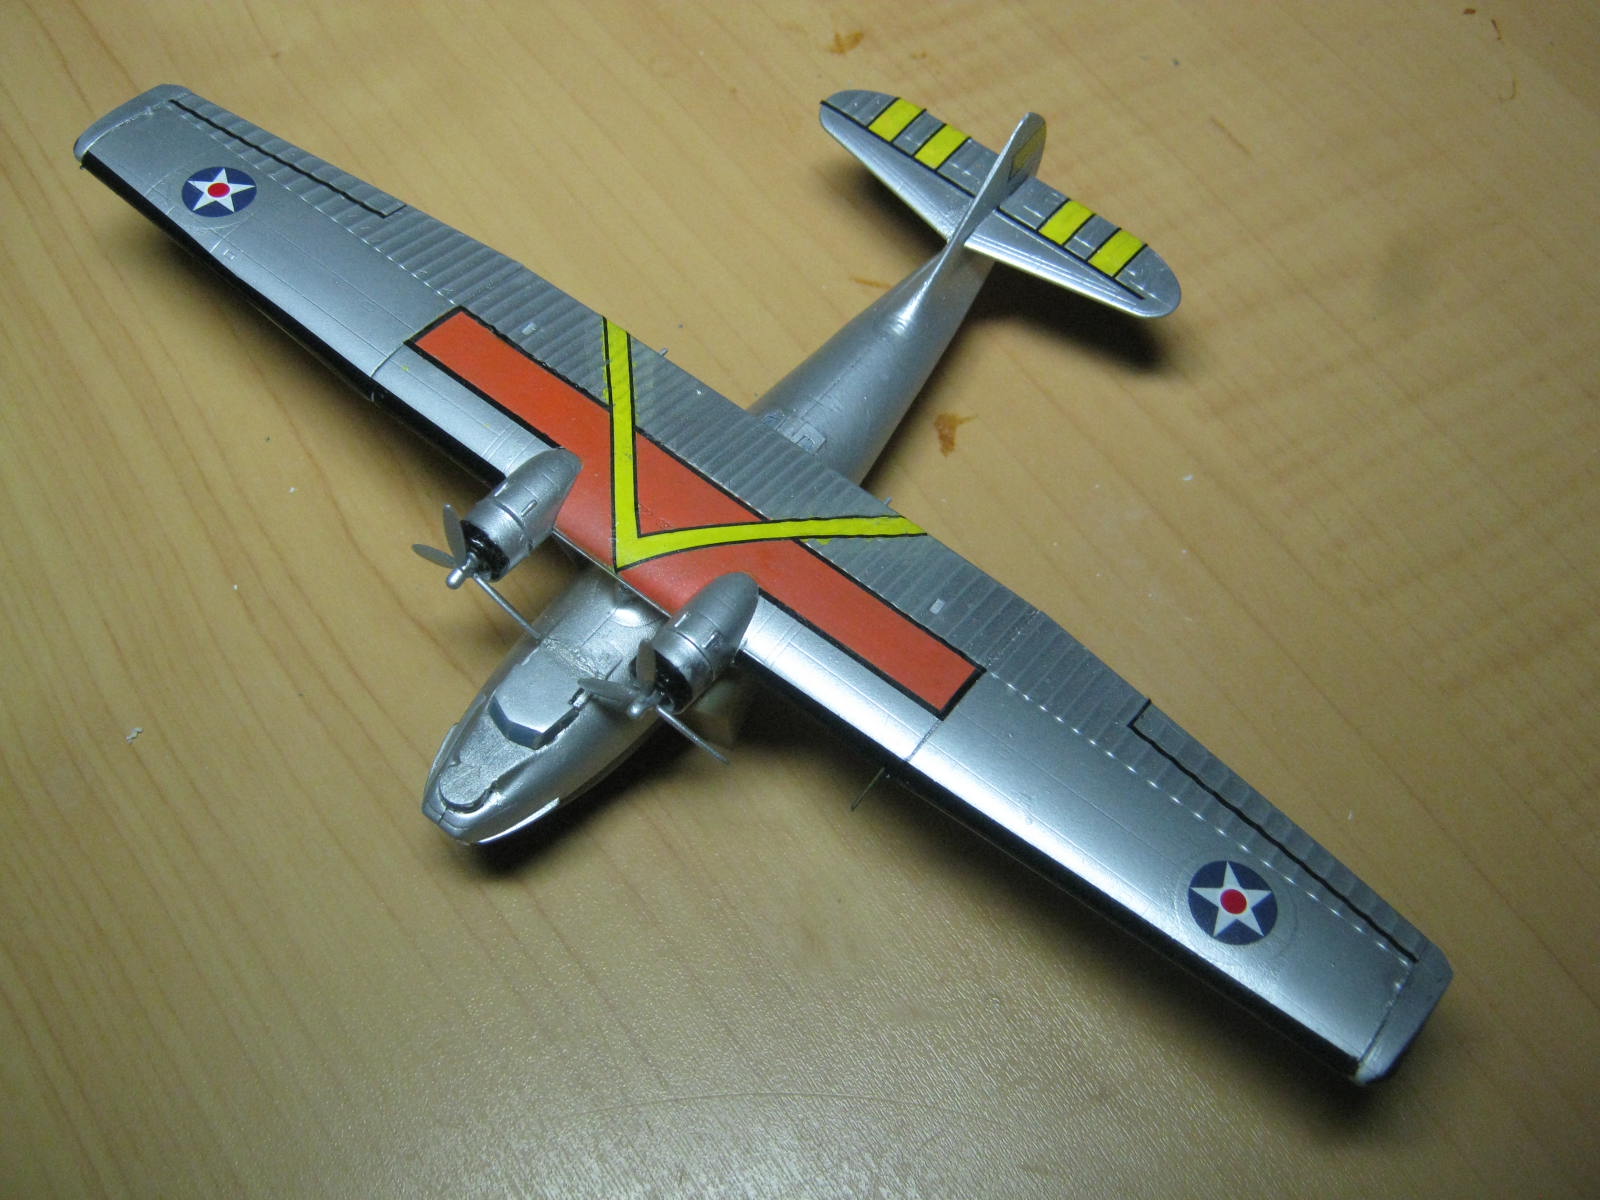 and a rarity - PBY 1 based on the Minicraft kit.